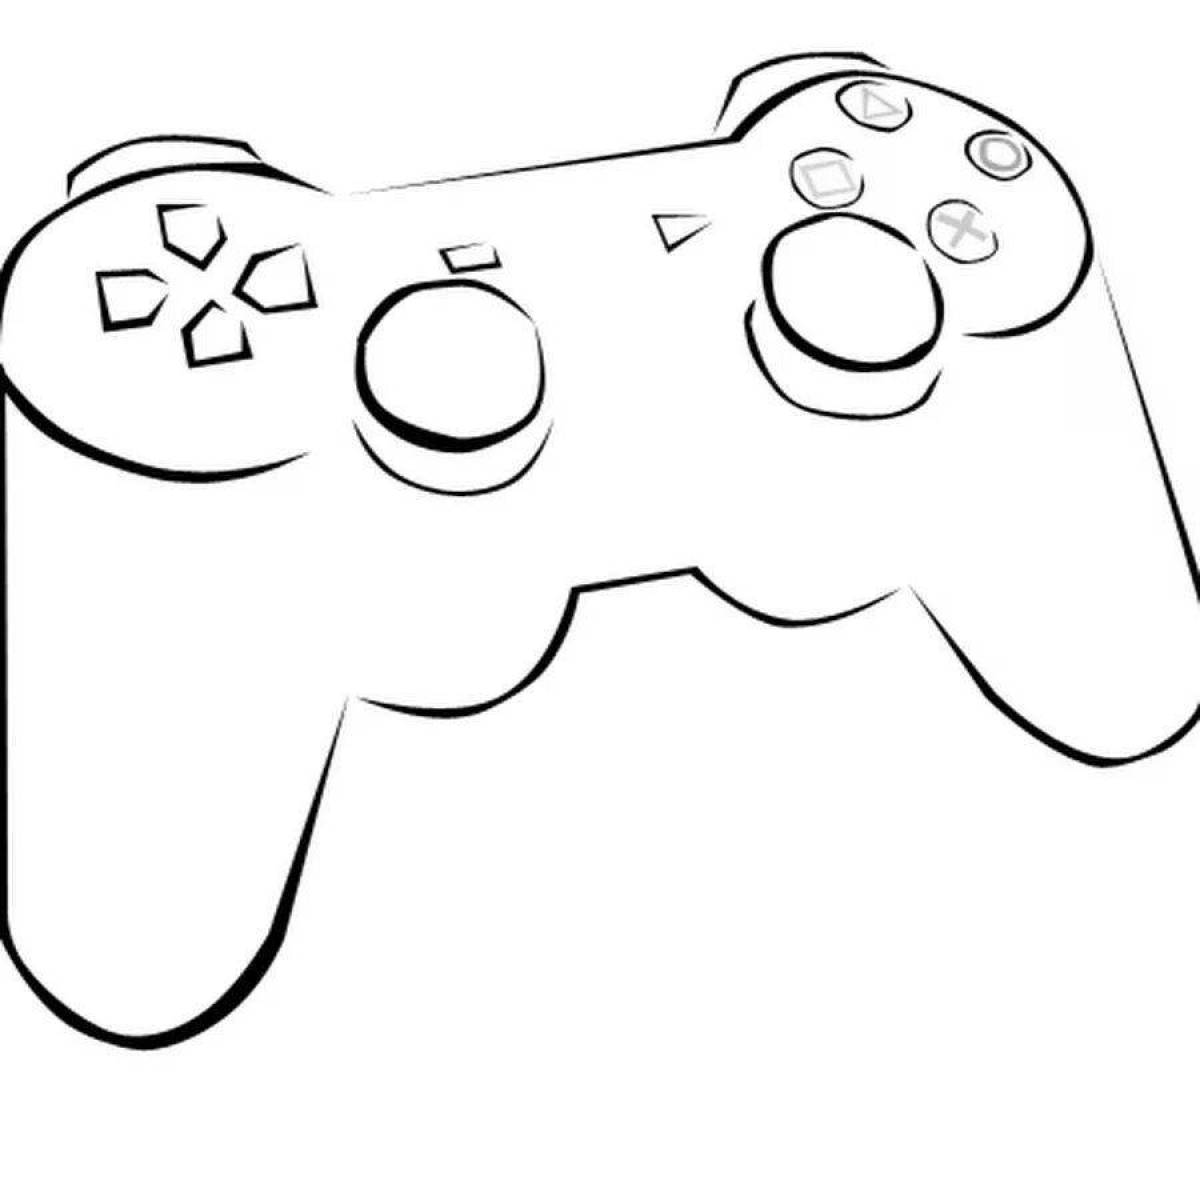 Coloring gamepad coloring page